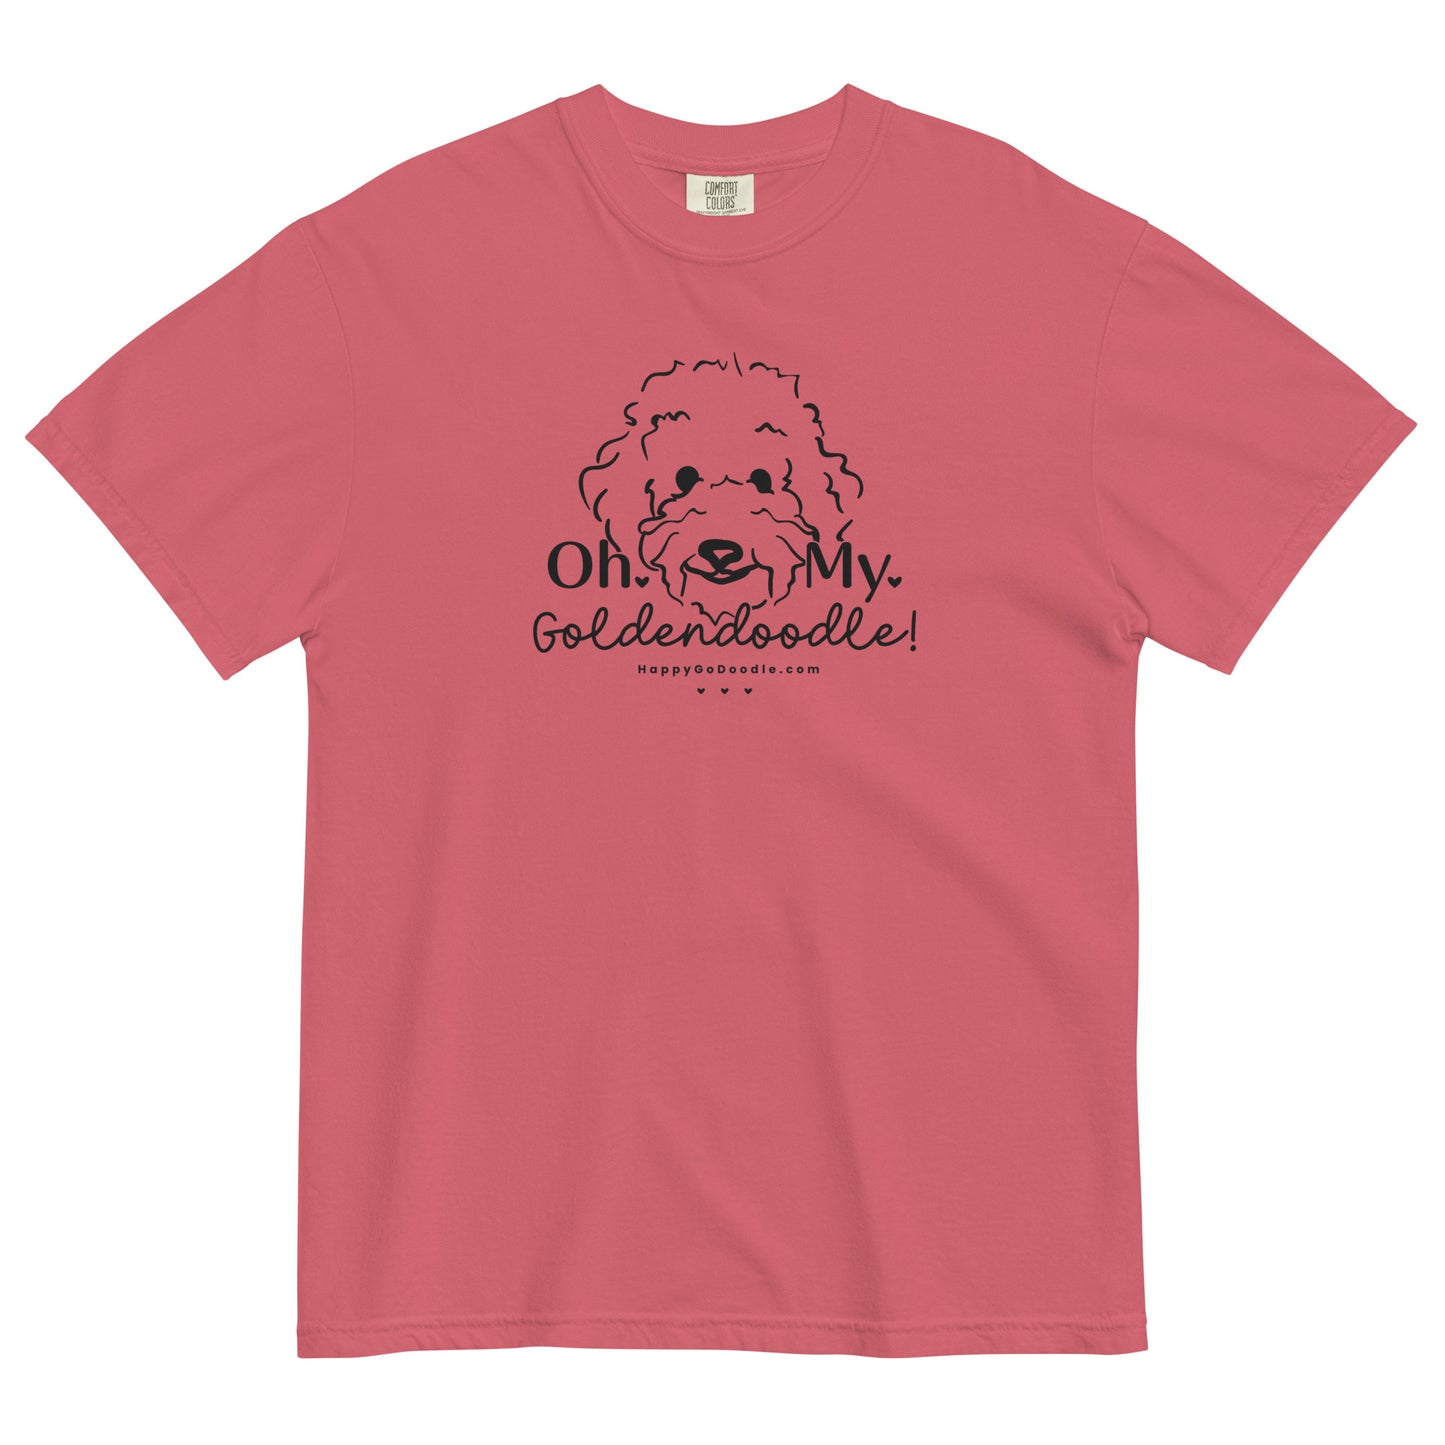 Goldendoodle comfort colors t-shirt with Goldendoodle face and words "Oh My Goldendoodle" in watermelon color